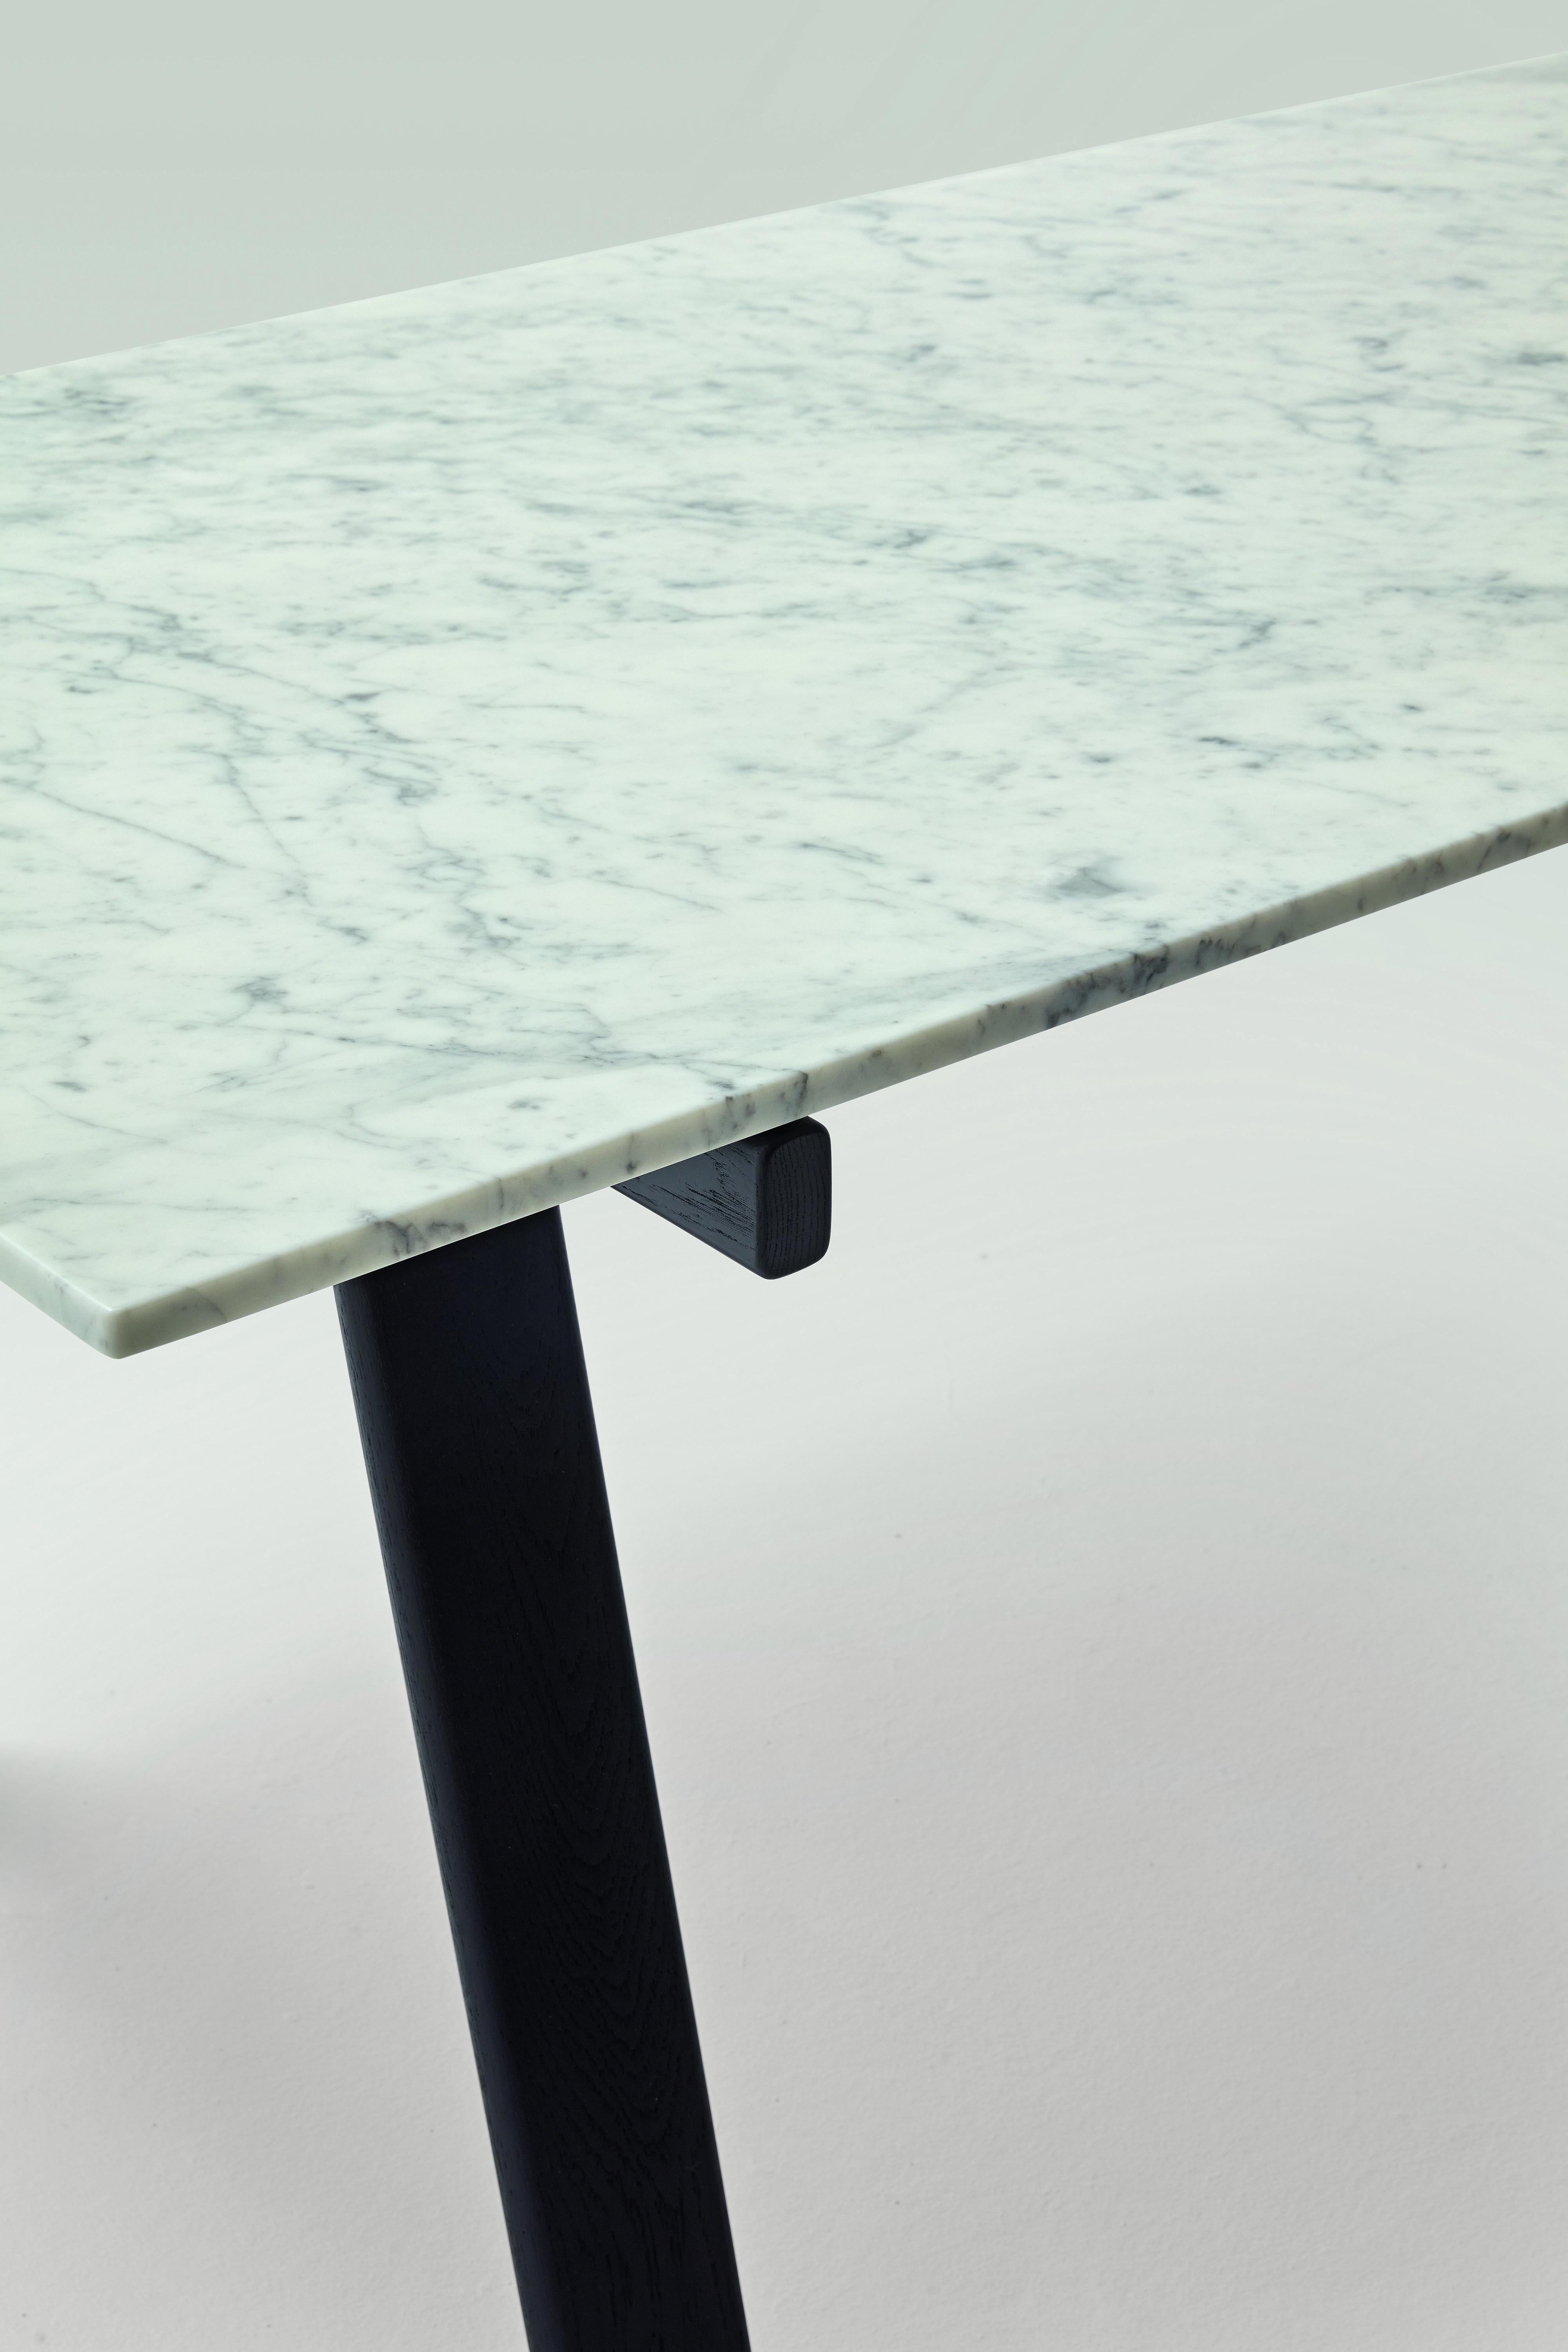 Zanotta Small Ambrosiano Table in Carrara Marble Top with Black Frame by Mist-o

Trestles in solid natural oak or painted black with open pore. Matt black painted stainless steel spars. Top available either in 1/2” thick smoky grey tempered plate